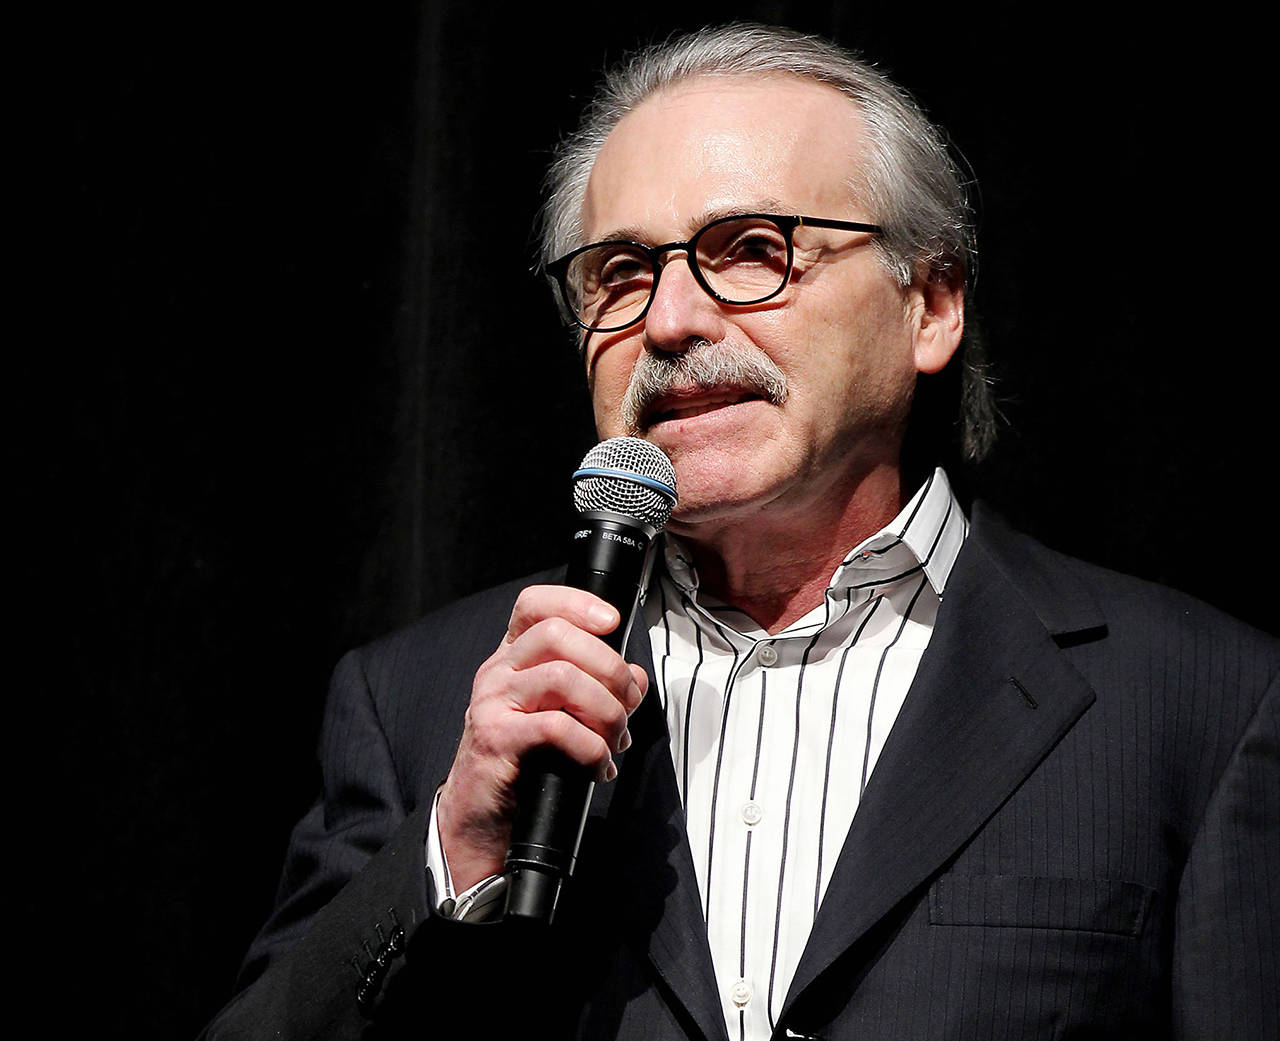 In this 2014 photo, David Pecker, Chairman and CEO of American Media, addresses those attending the Shape & Men’s Fitness Super Bowl Party in New York. (Marion Curtis via AP, File)